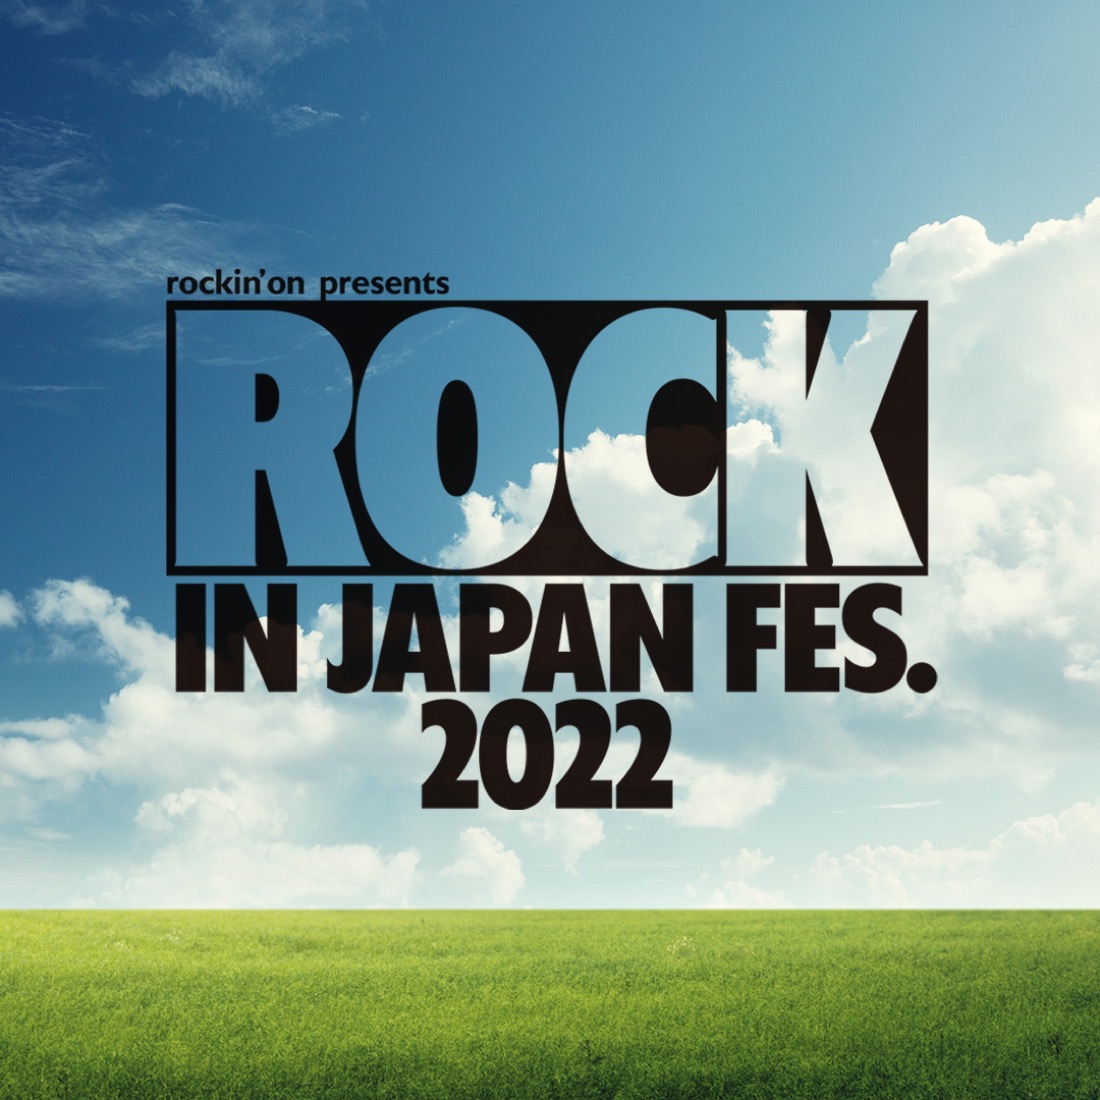 『ROCK IN JAPAN FES 2022』第1弾出演アーティスト16組発表 - 画像一覧（2/2）